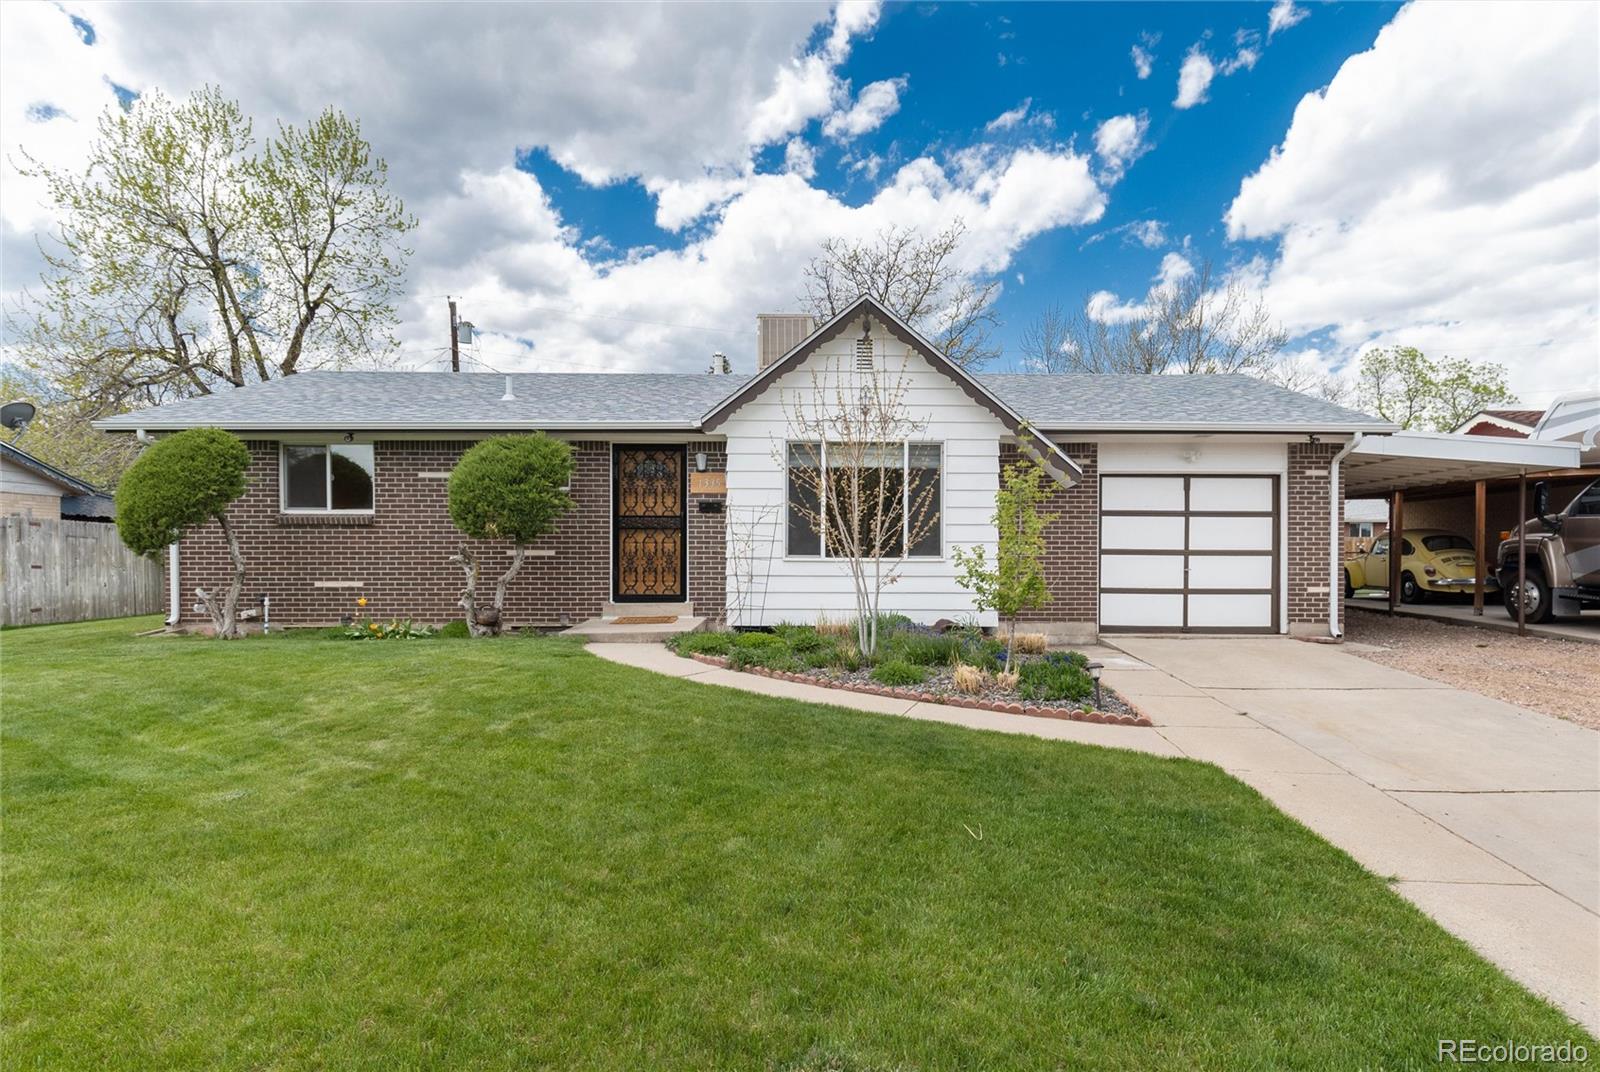 Report Image for 1335 S Zephyr Street,Lakewood, Colorado